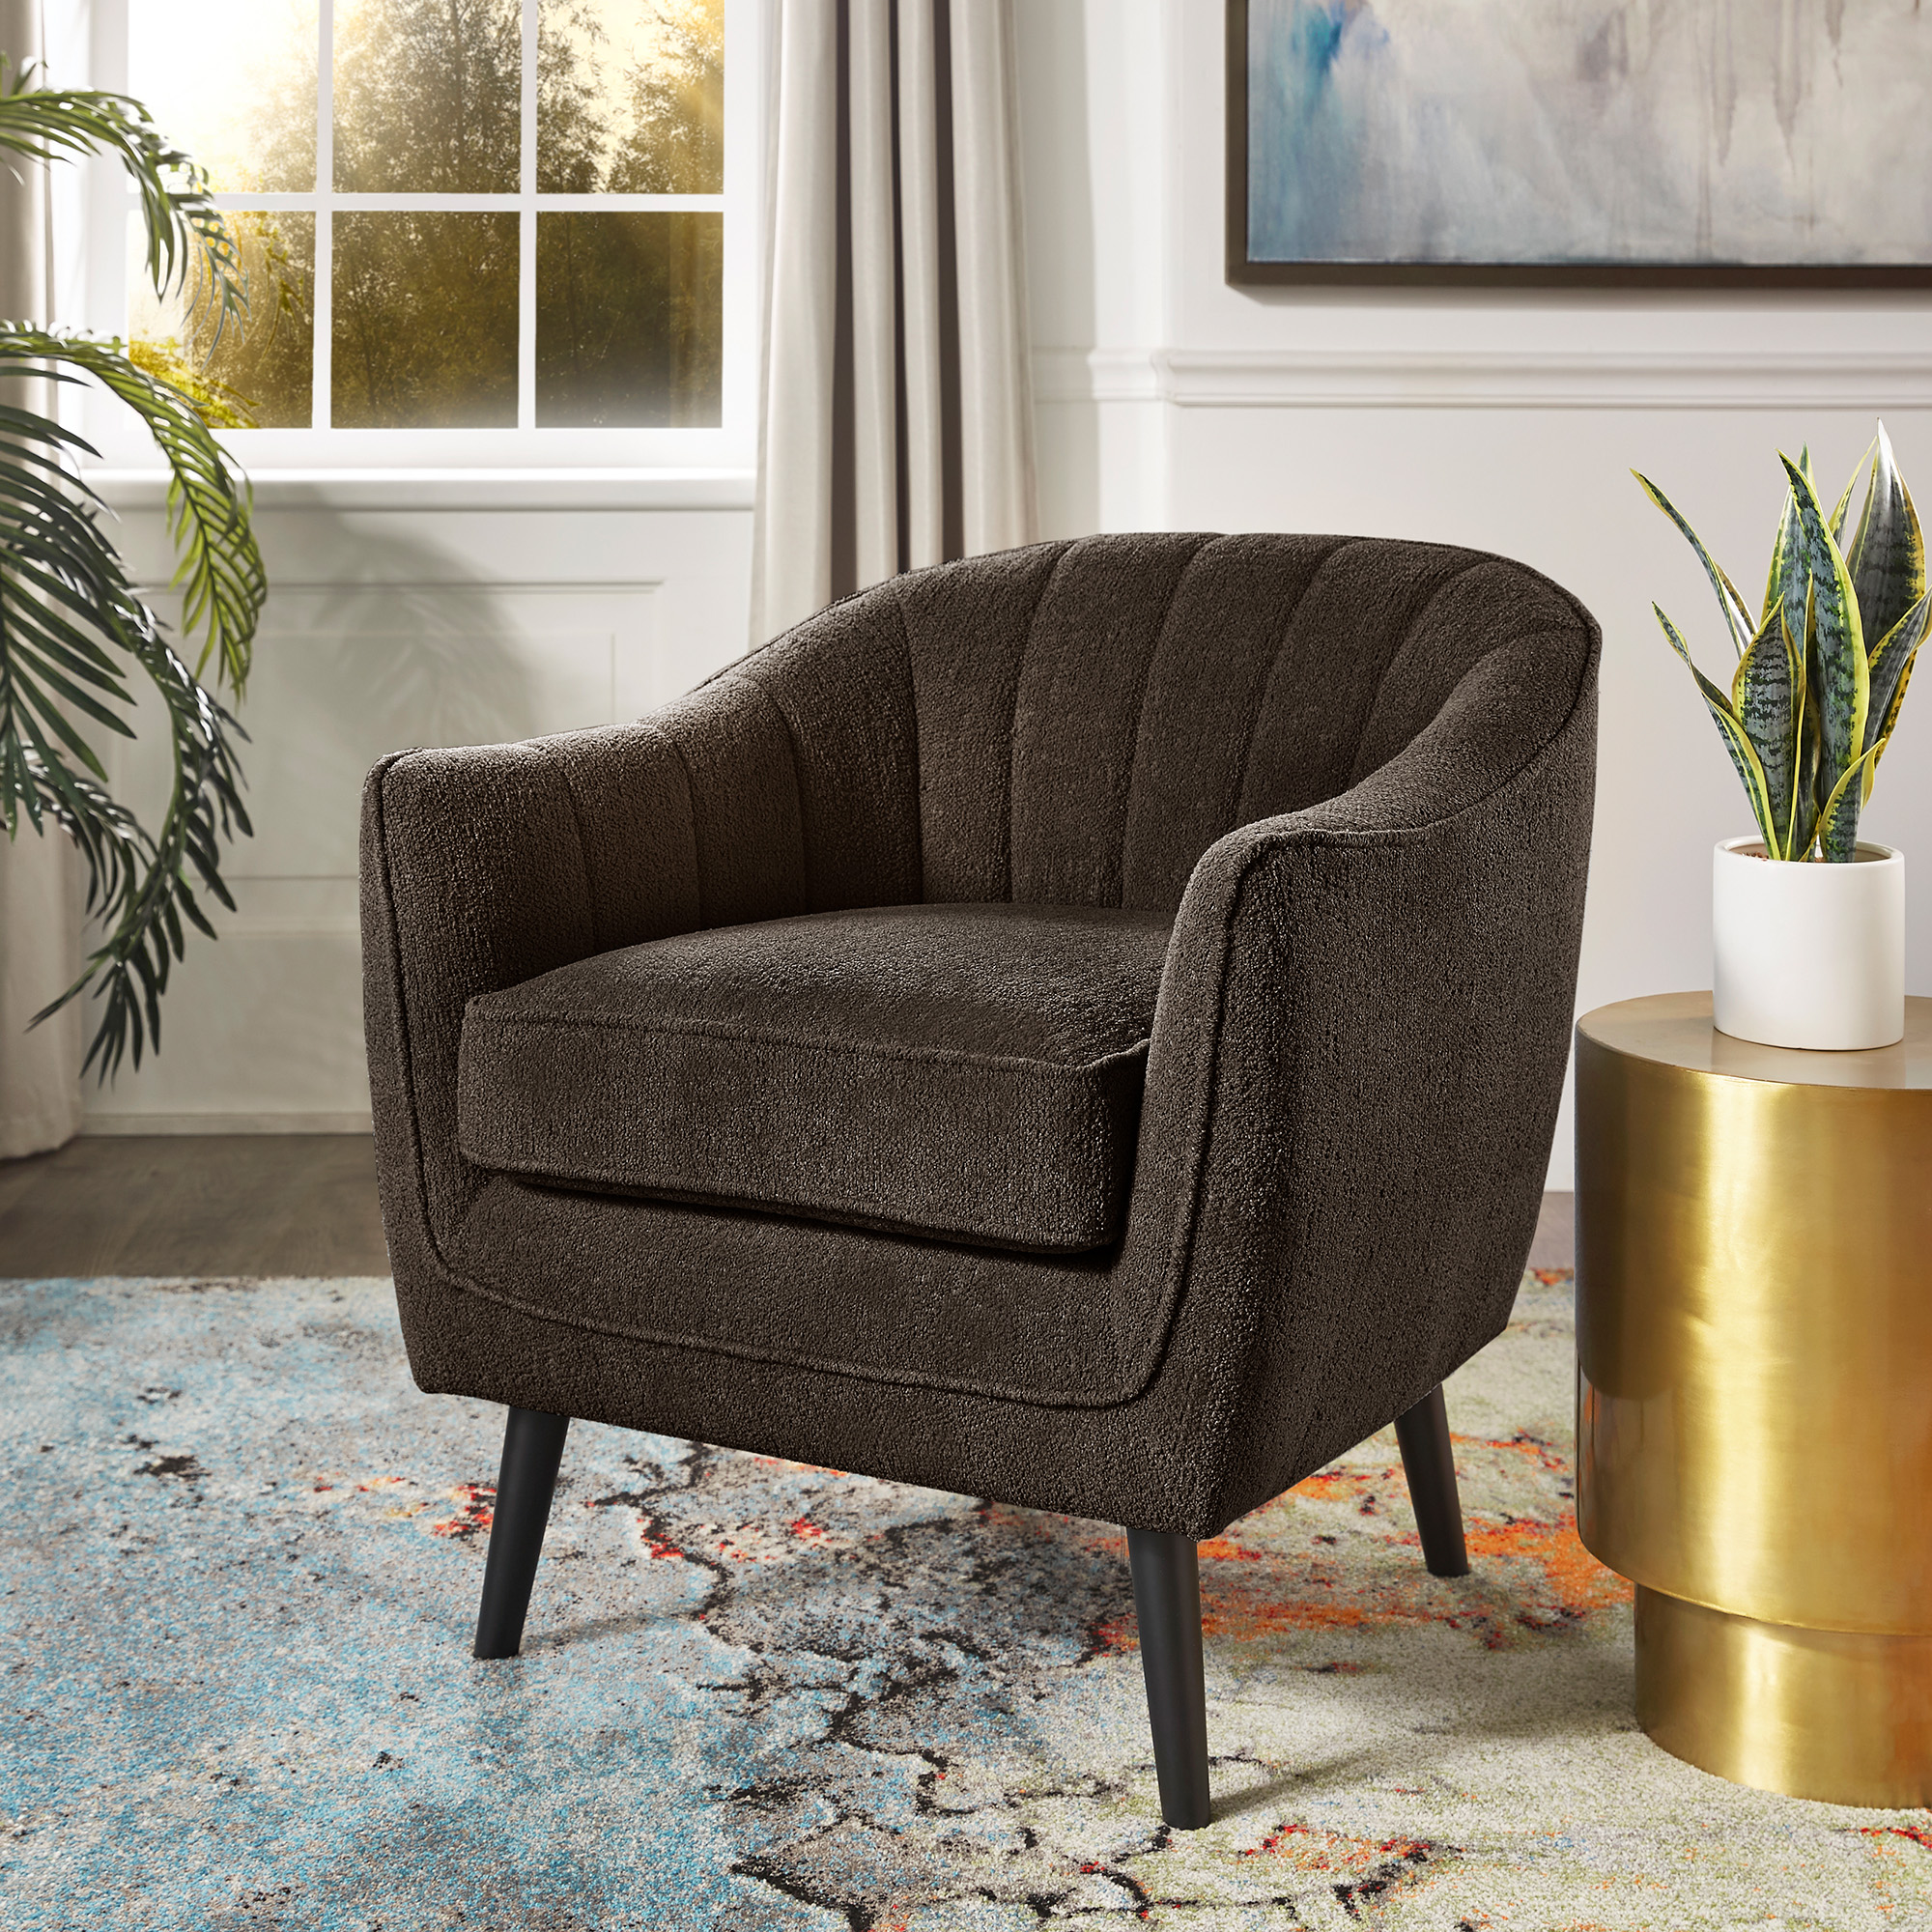 Mid-Century Modern Channel-Tufted Accent Chair with Removable Cushion Cover